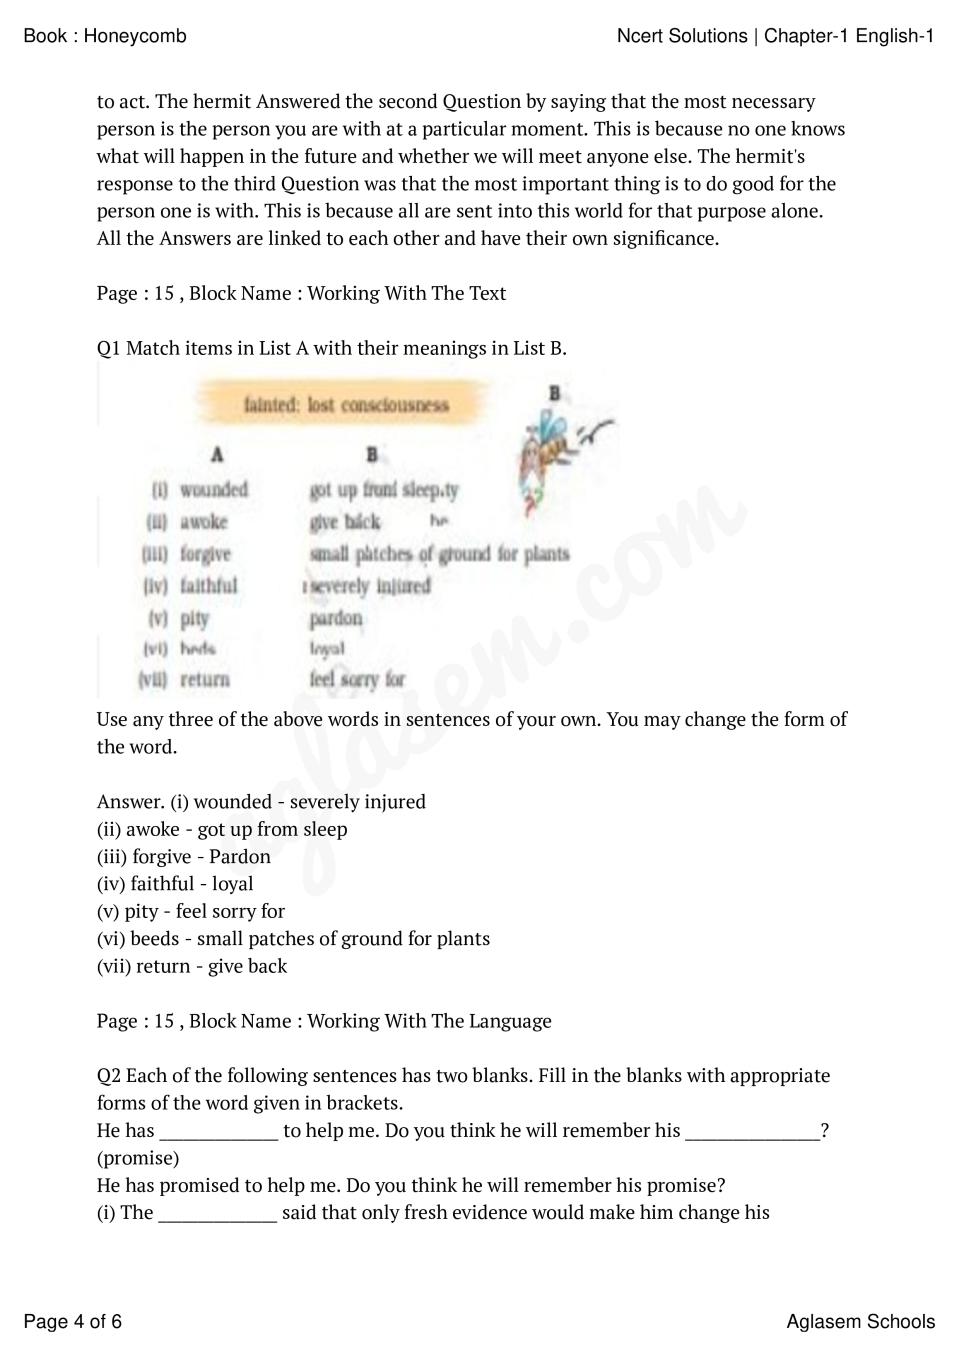 NCERT Solutions For Class 7 English Chapter 1 Three Questions The 